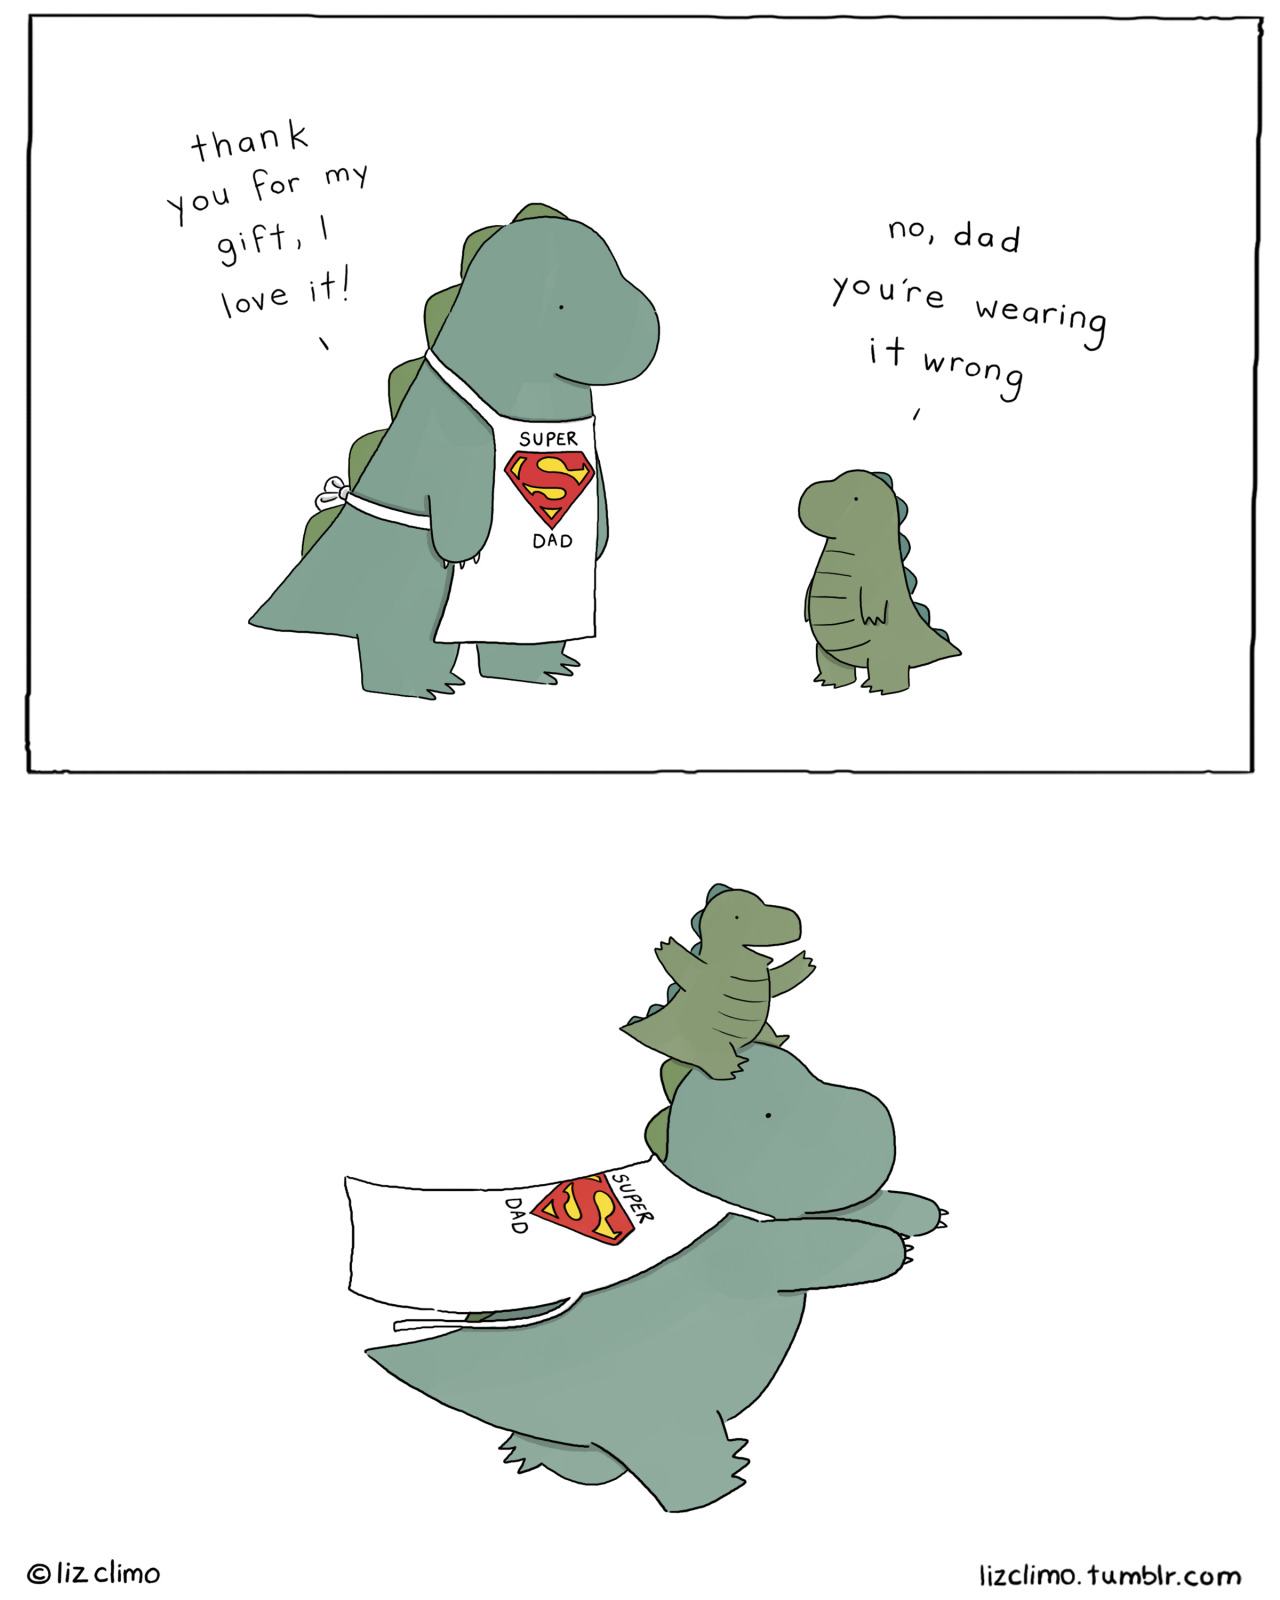 father's day liz climo - thank you for my no, dad gift, I love it! you're wearing it wrong Super Dad Dad Super { liz climo lizclimo.tumblr.com